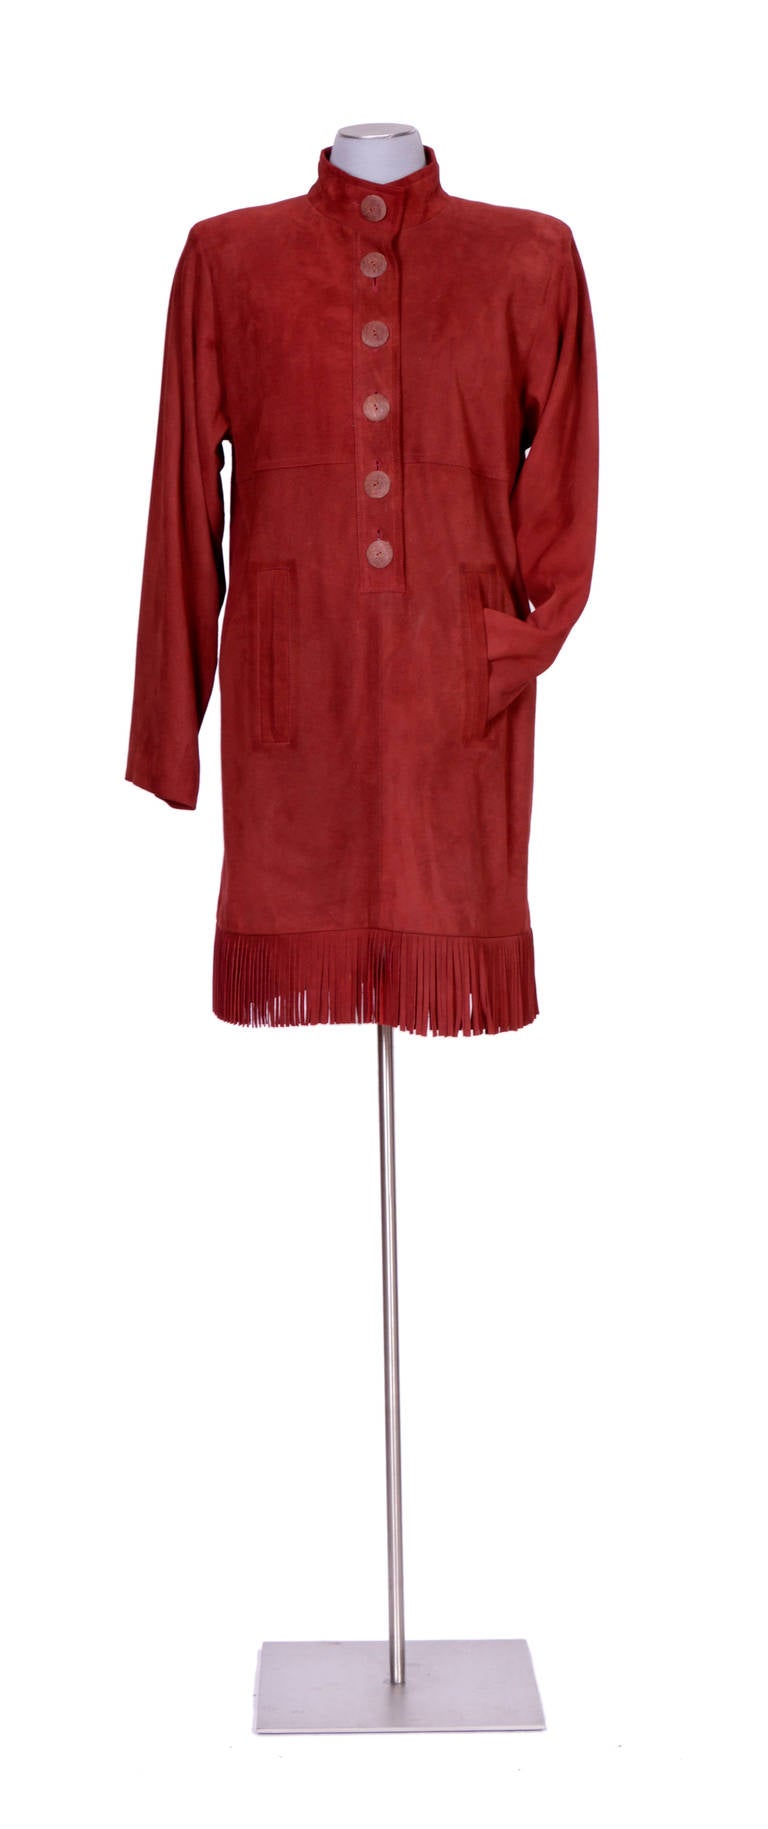 Amazing Yves Saint Laurent vintage 70's lamb suede dress, fringed hemline, slide pockets,dark red wine colour...... in excellent condition.
French size 40. 
Measurements taken flat in inches : Sh to Sh 17